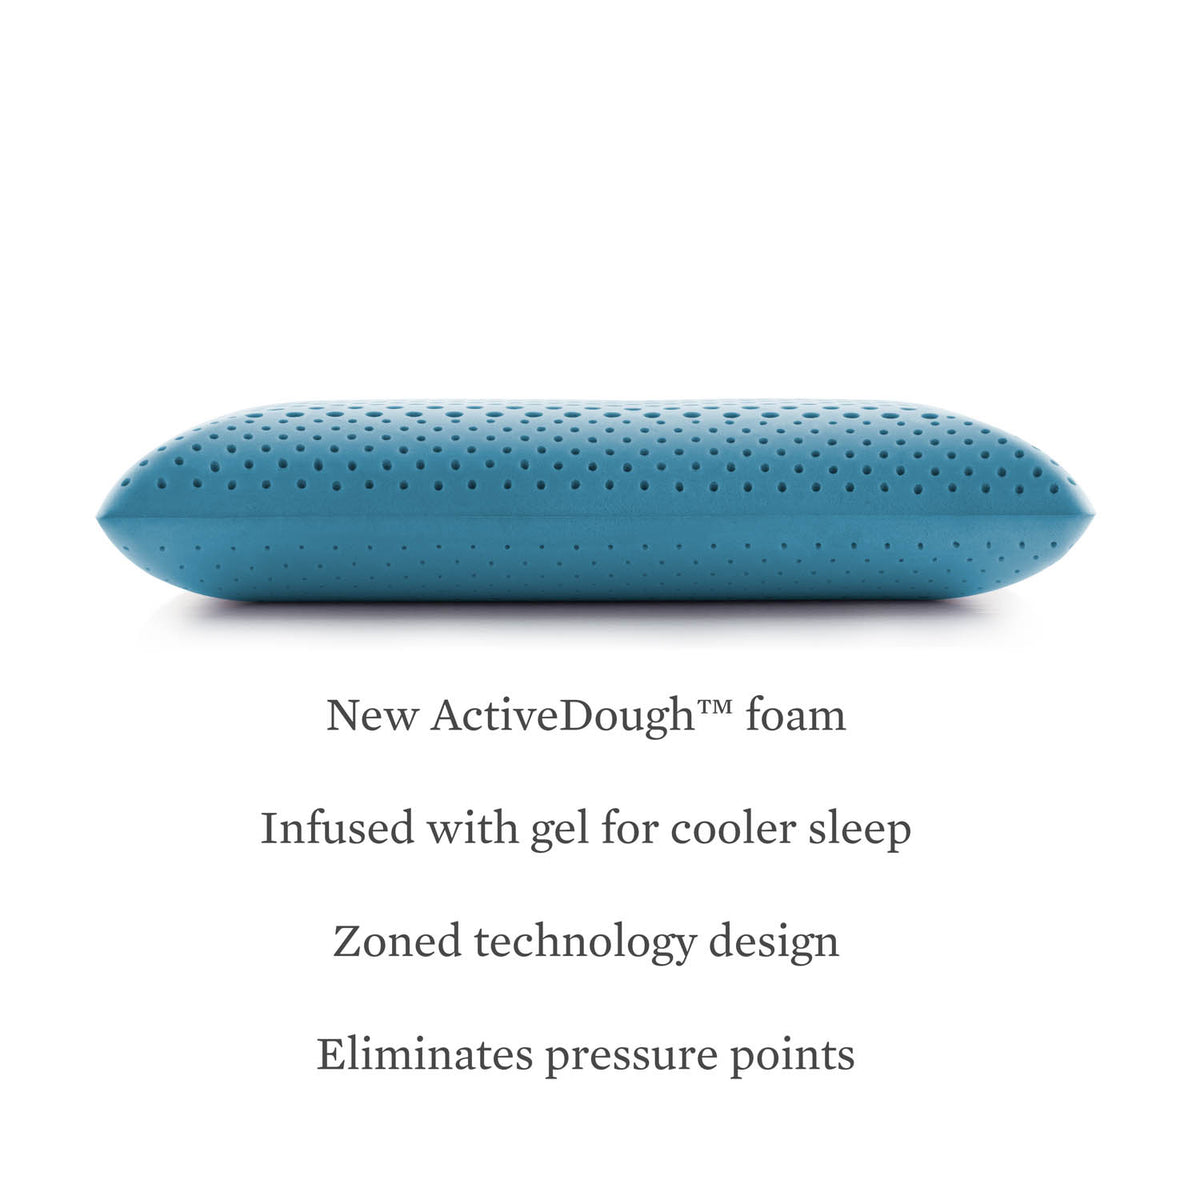 Malouf Zoned ActiveDough + Cooling Gel